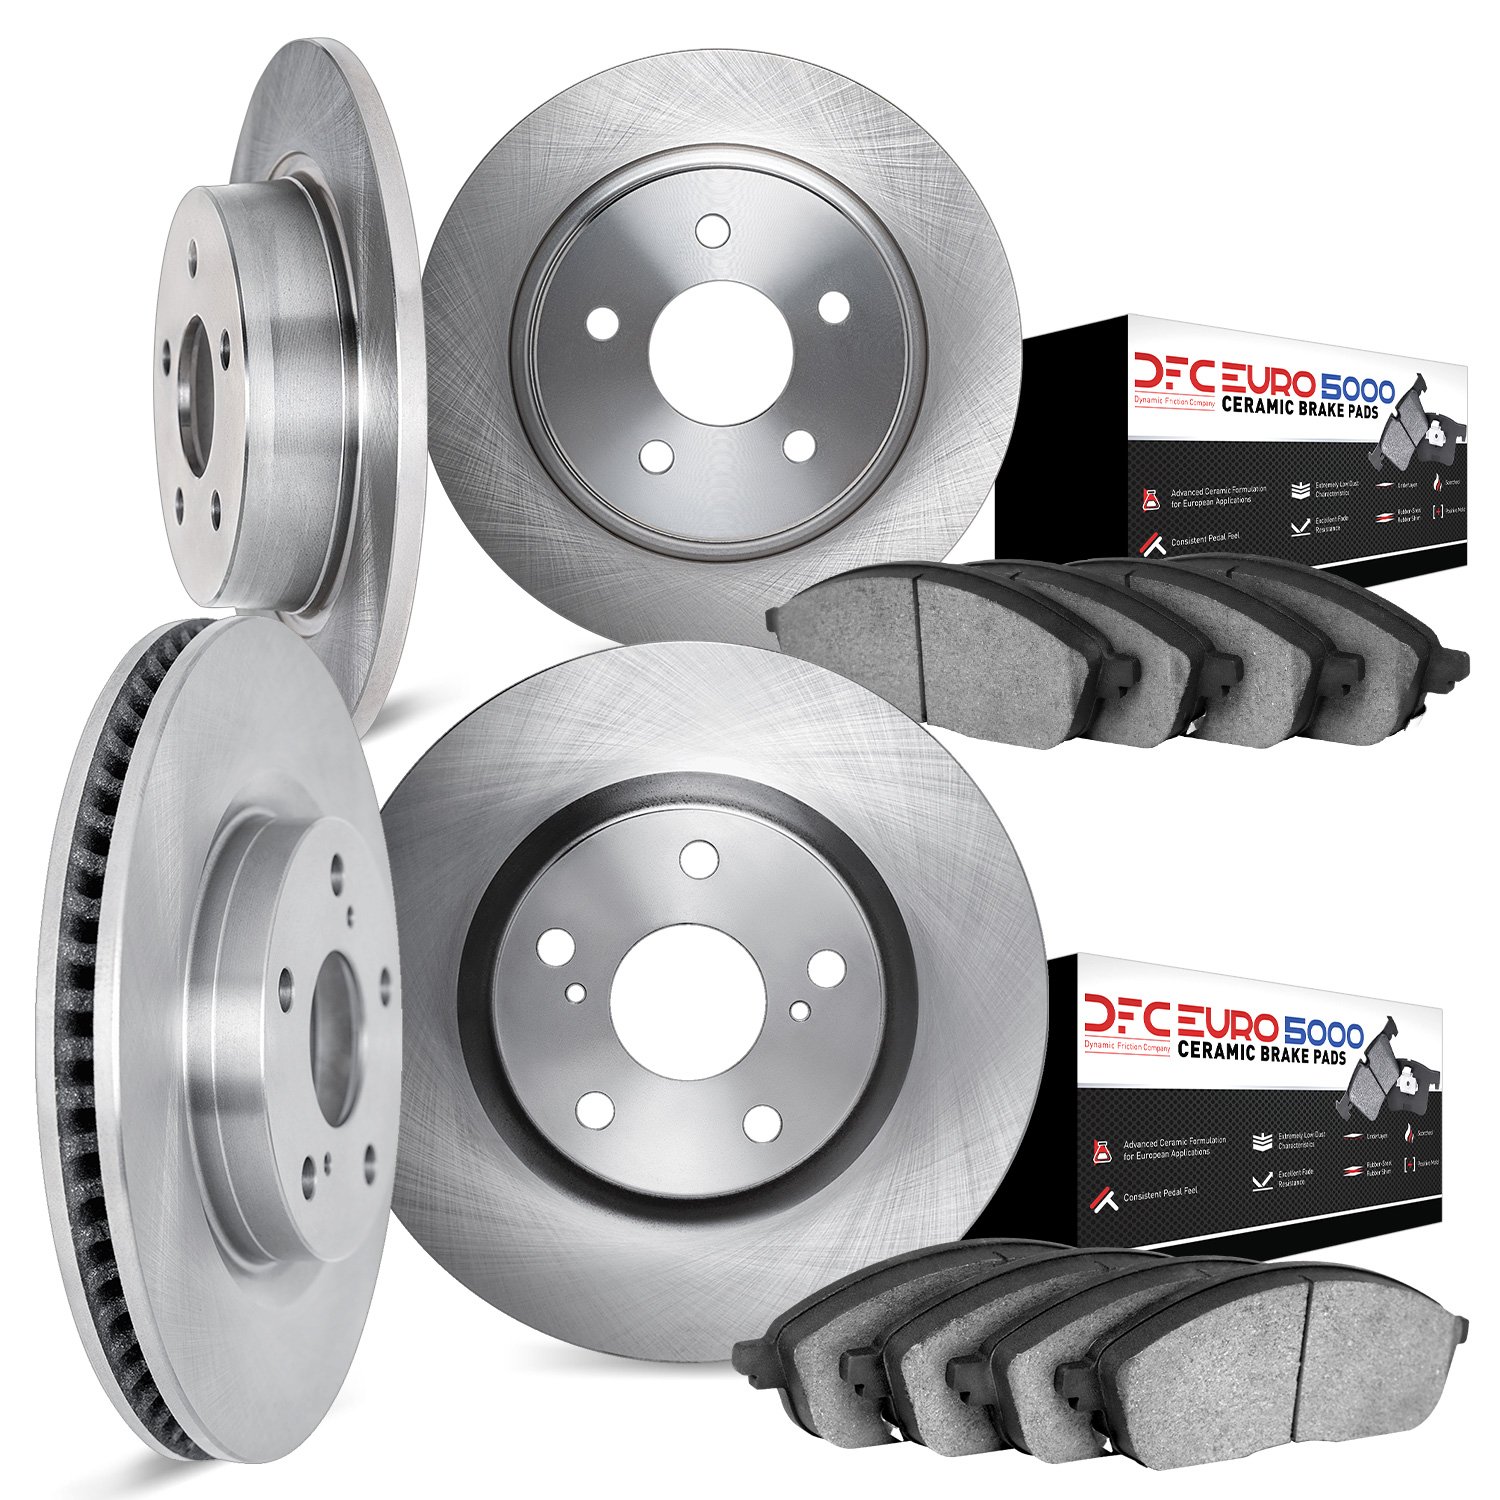 6604-11316 Brake Rotors w/5000 Euro Ceramic Brake Pads, 2006-2010 GM, Position: Front and Rear